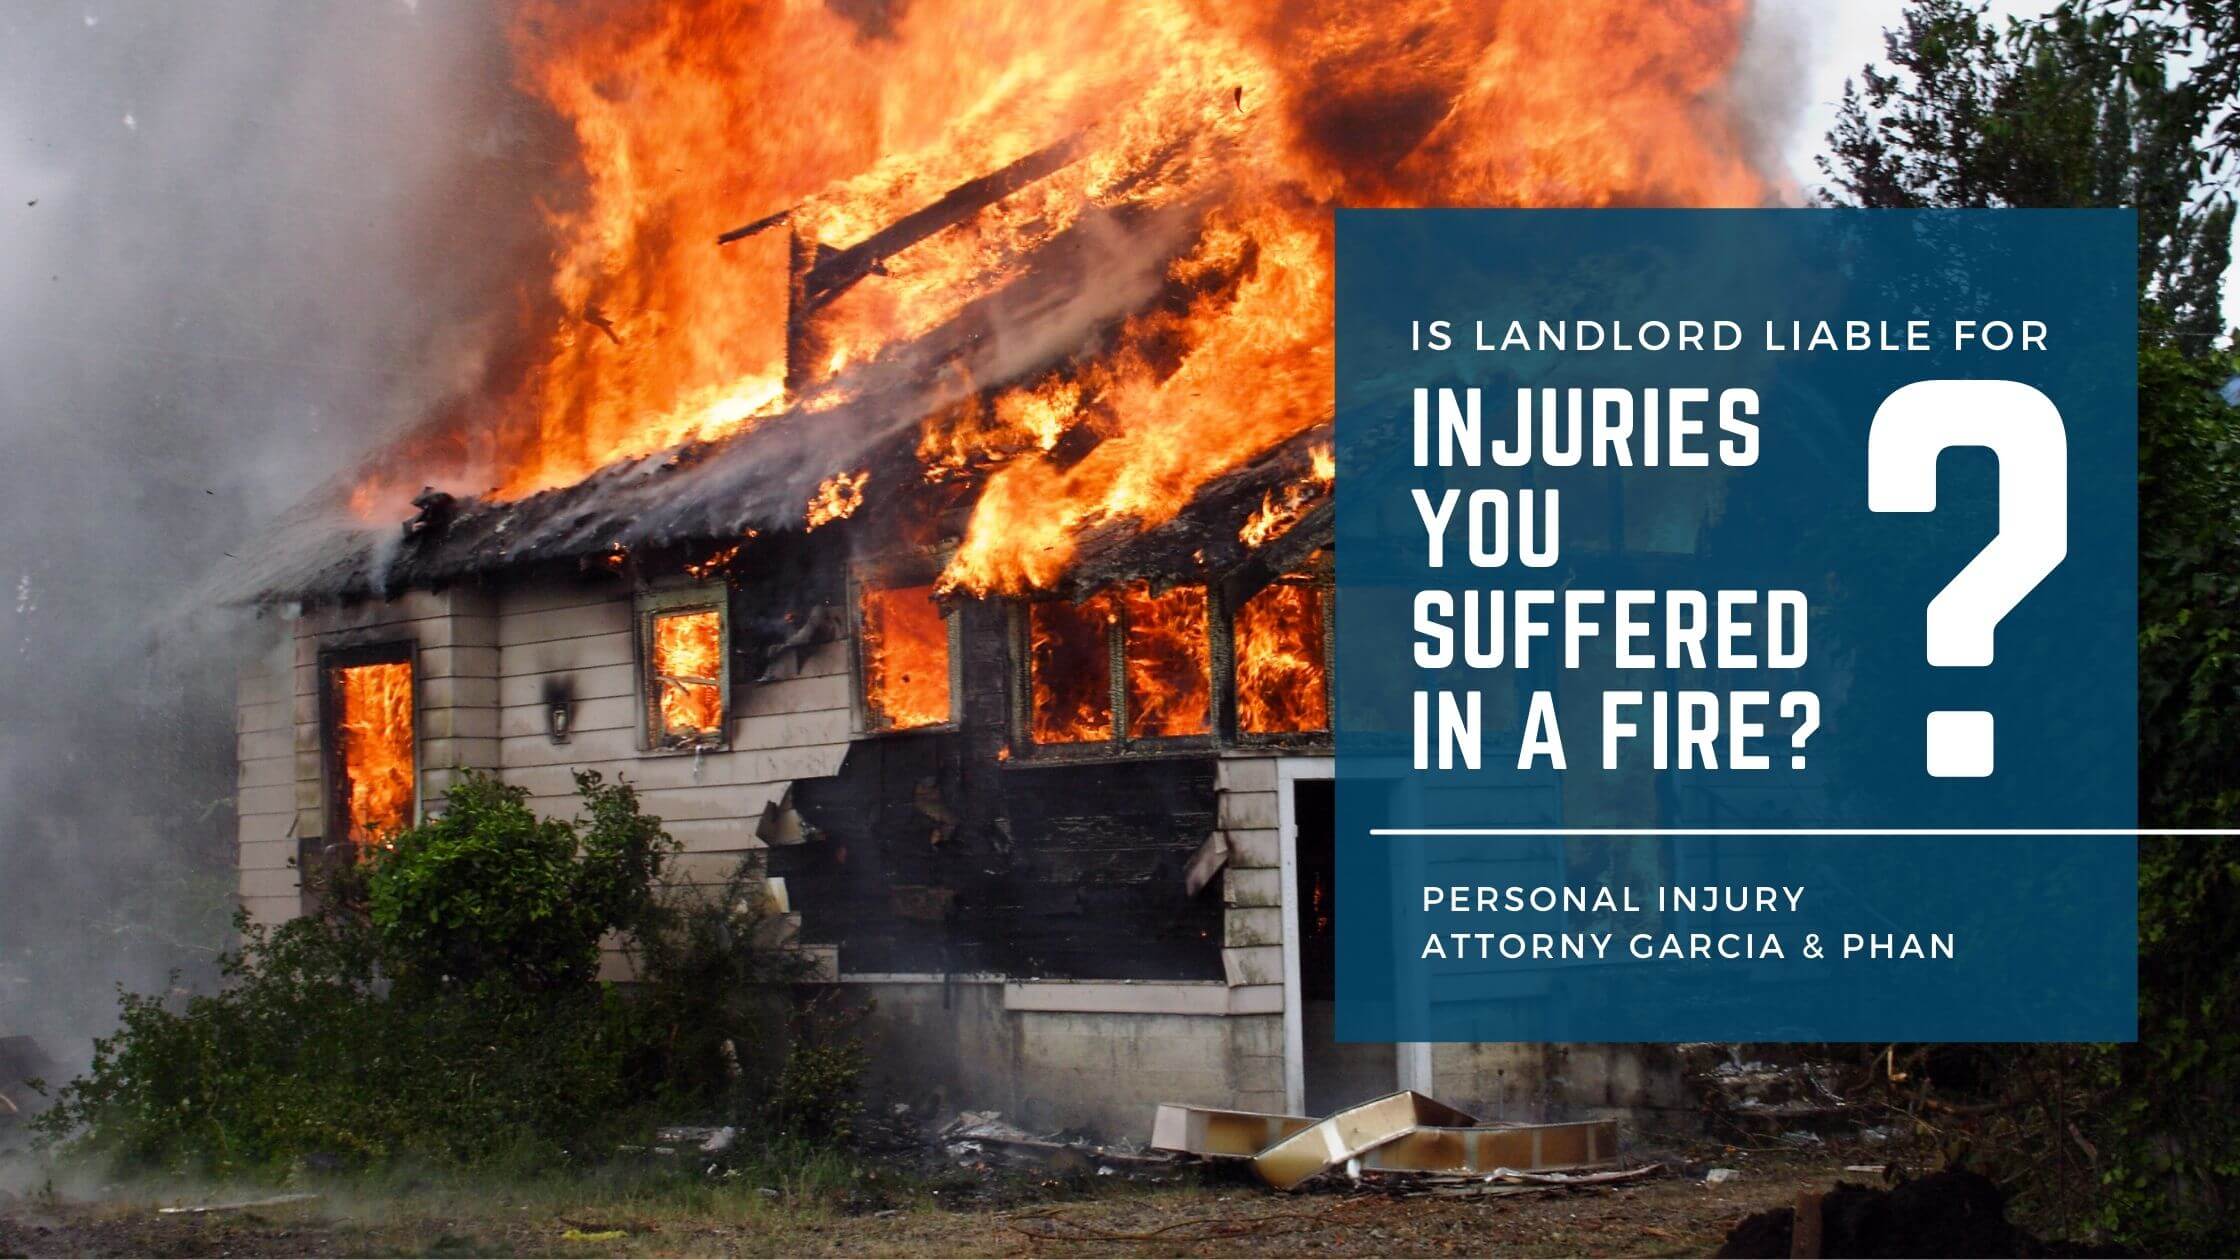 Is-landlord-Liable-for-Injuries-You-Suffered-in-a-Fire-garciaphan